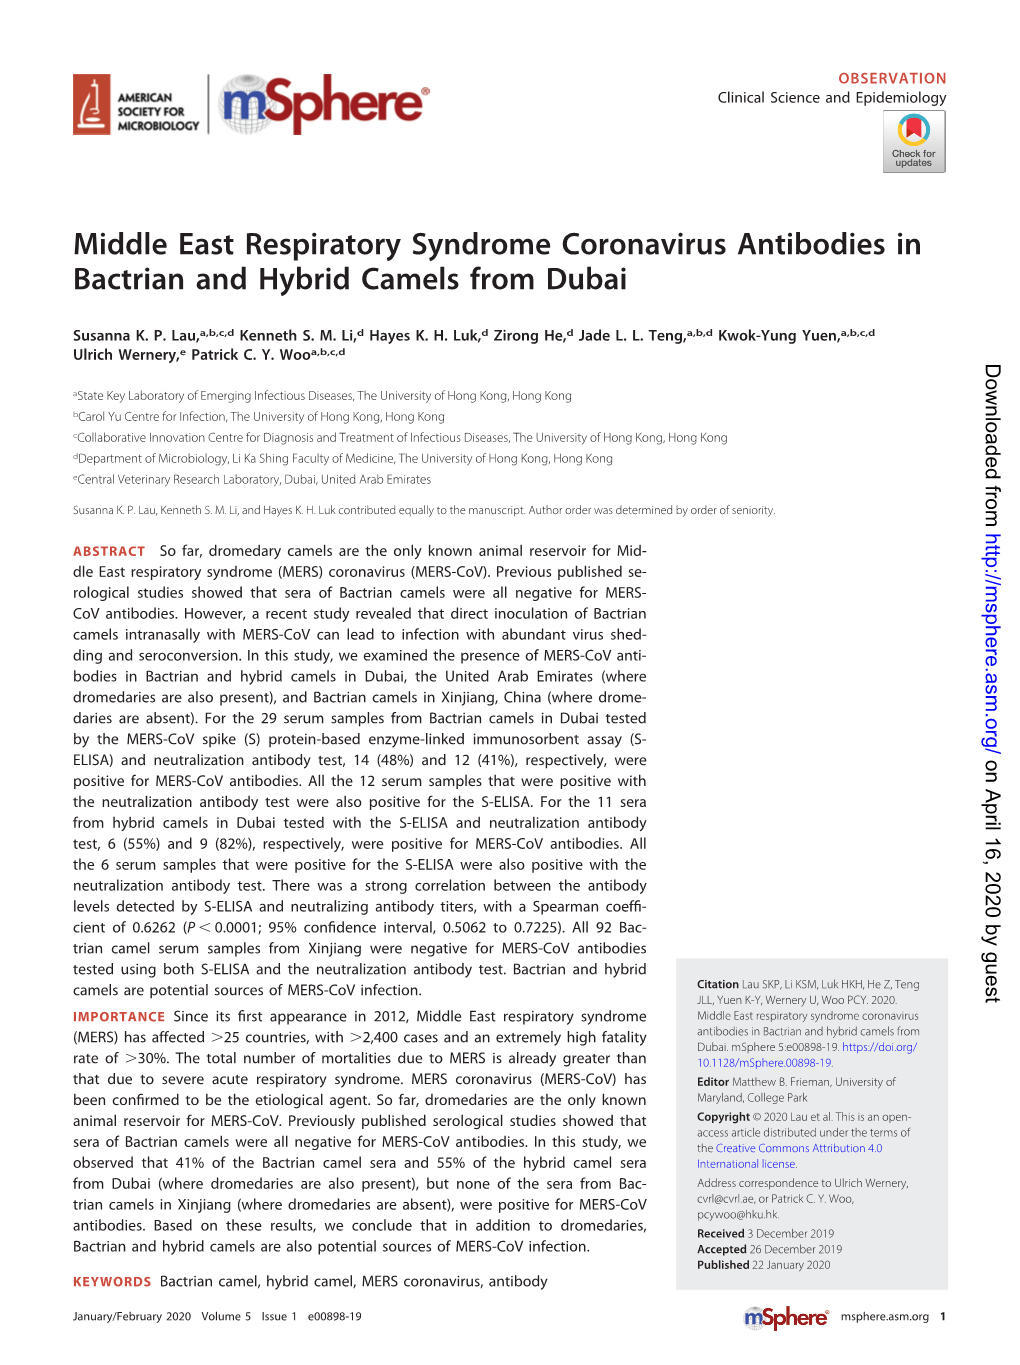 Middle East Respiratory Syndrome Coronavirus Antibodies in Bactrian and Hybrid Camels from Dubai